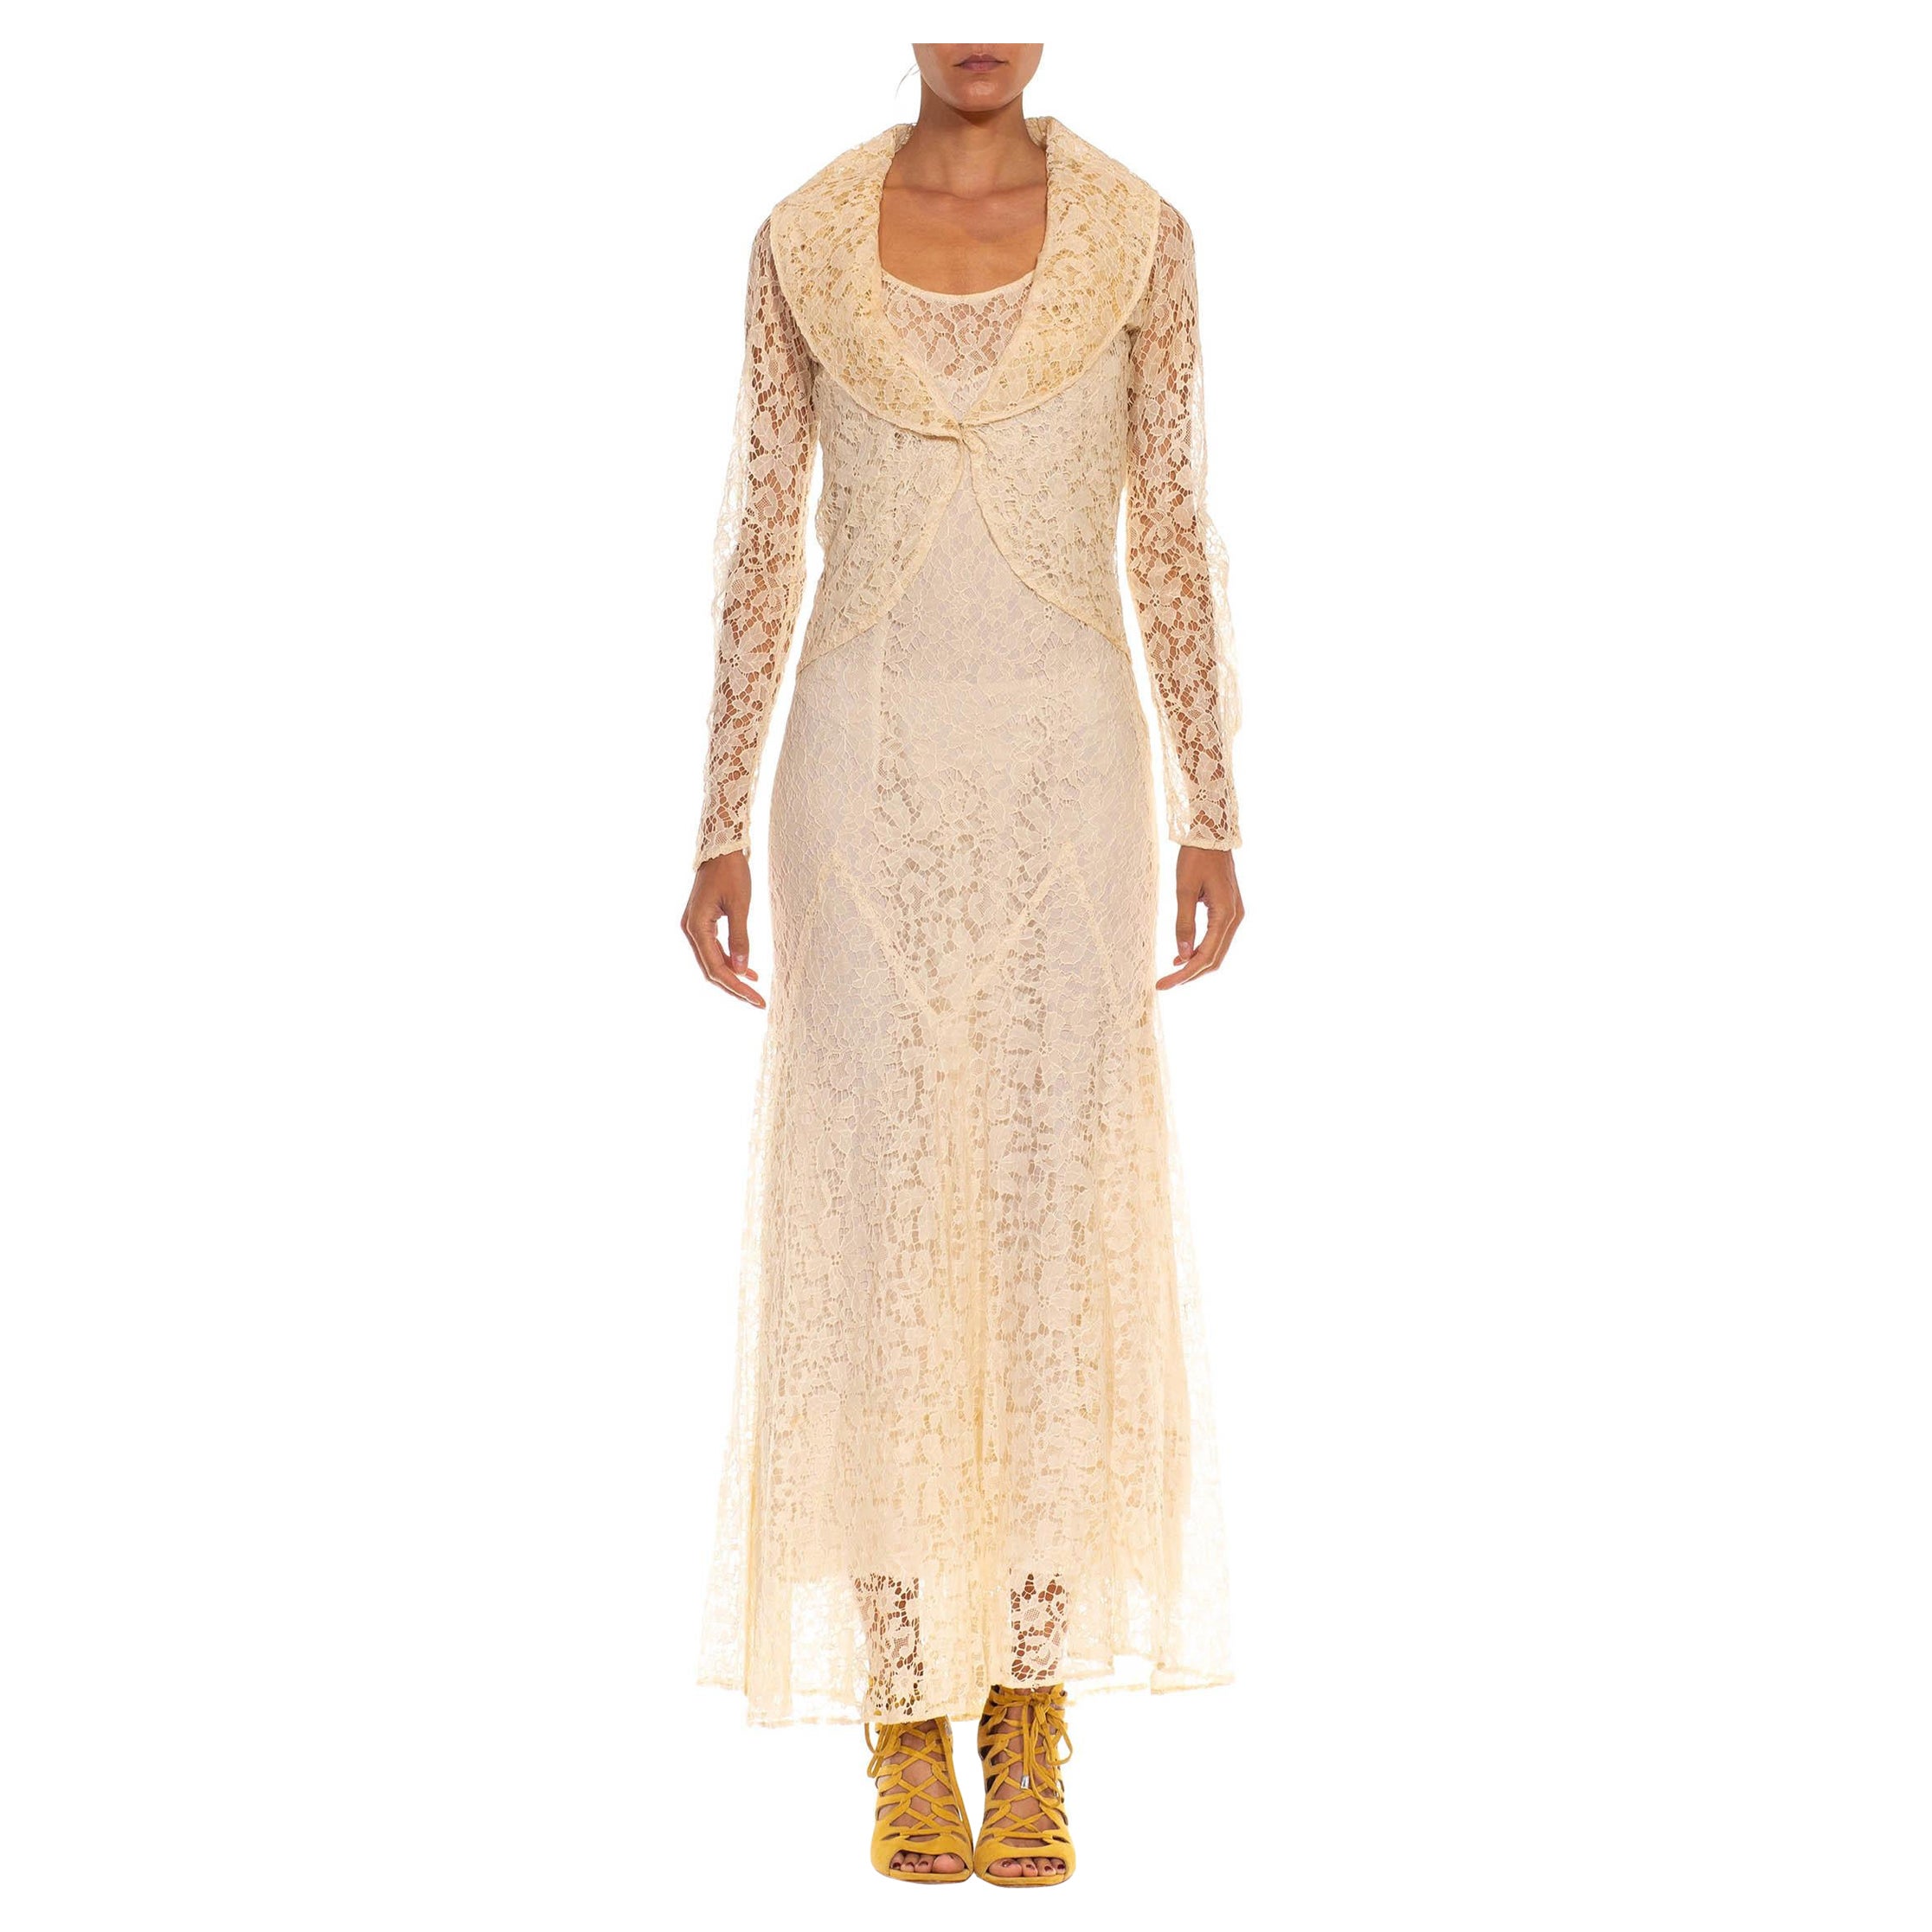 1930S Cream Silk & Rayon Corded Lace Dress Jacket Ensemble For Sale